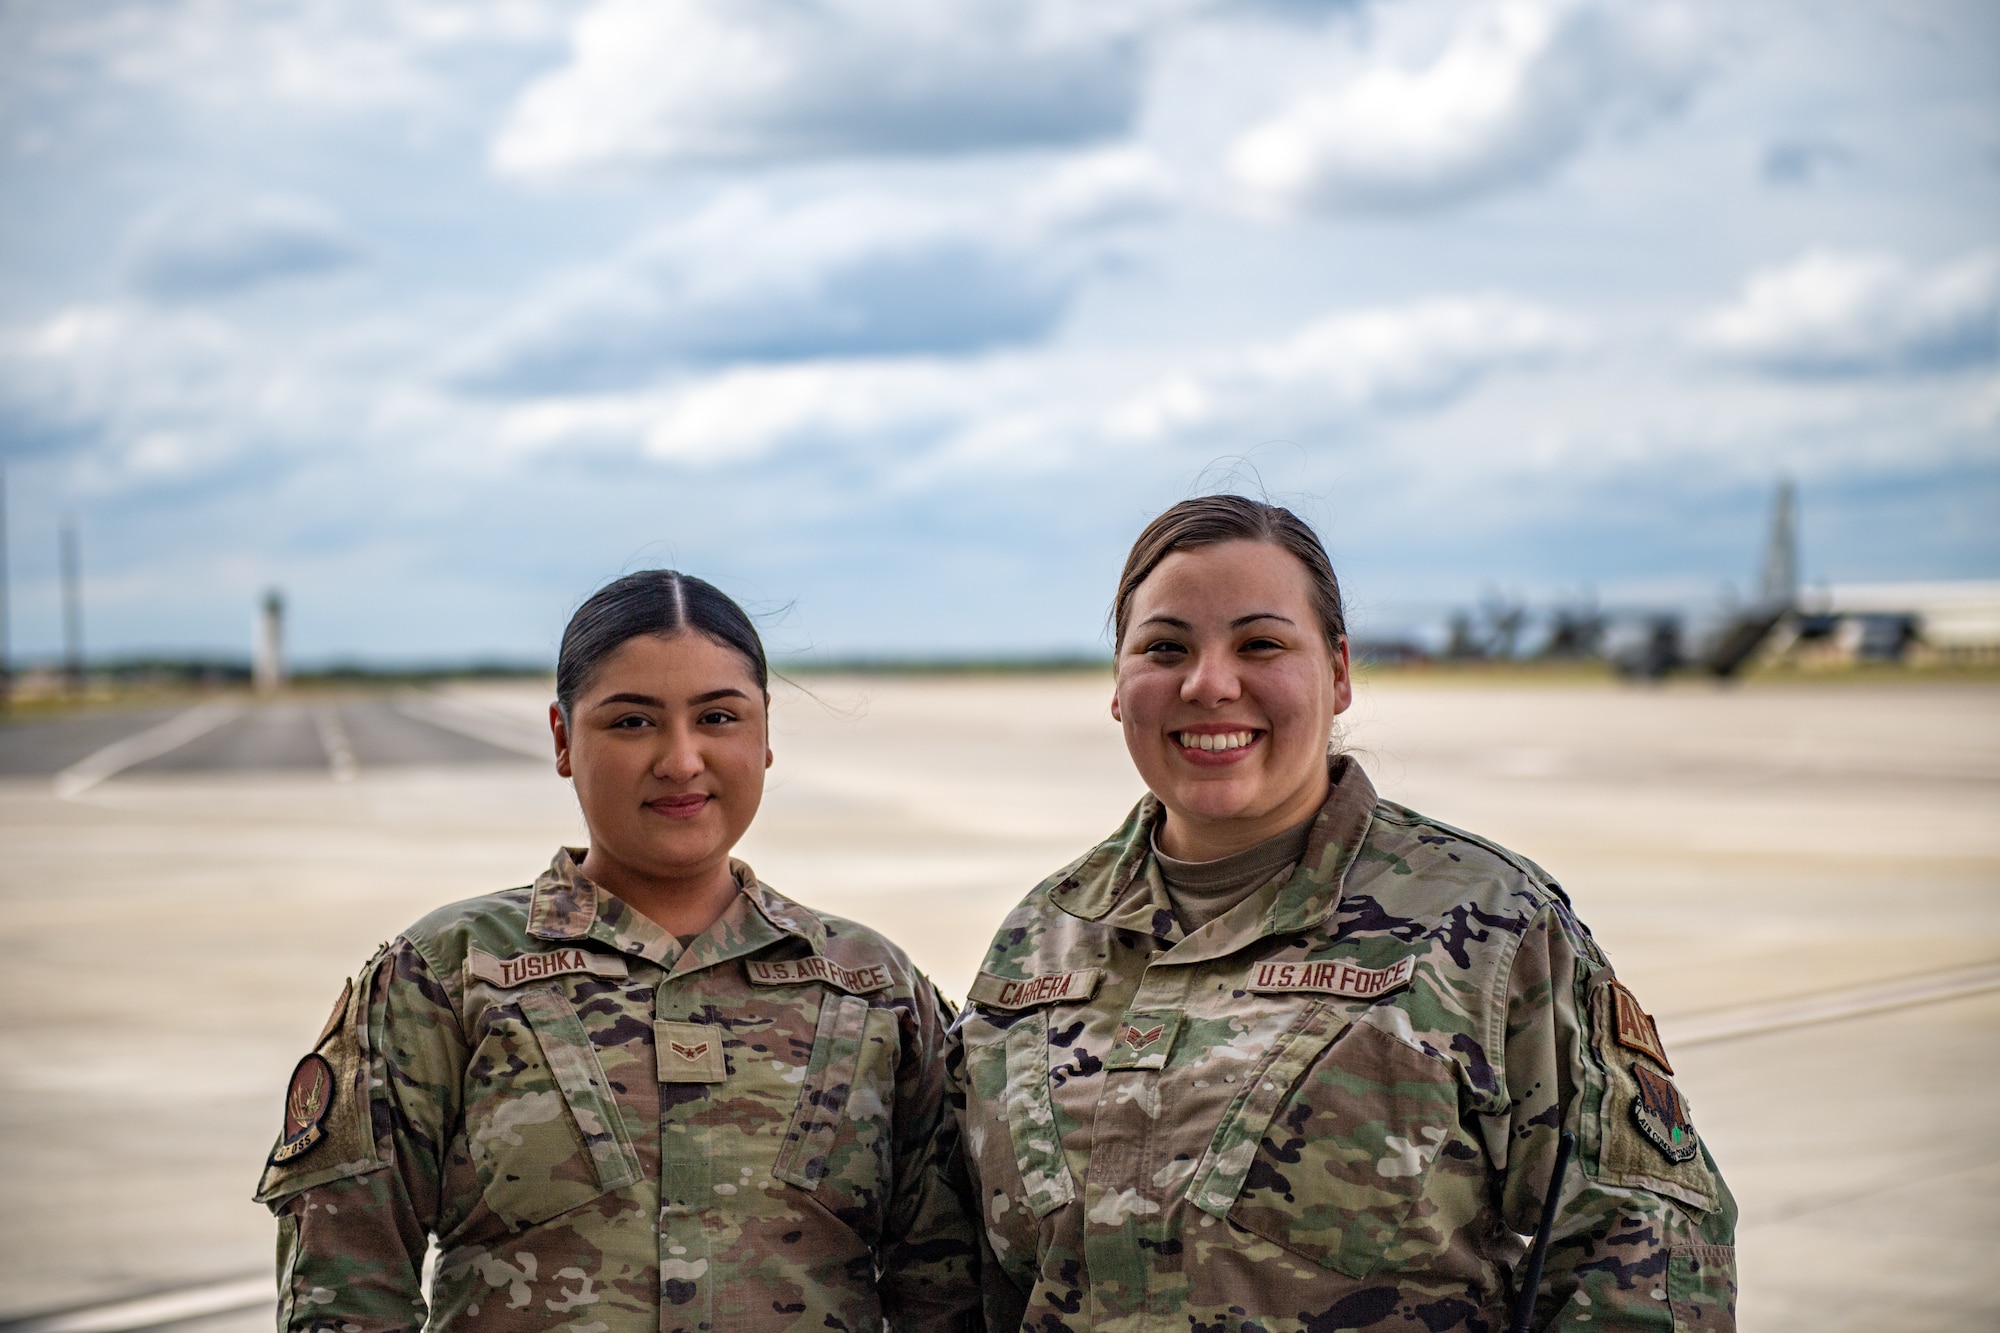 U.S. Air Force Airman 1st Class Hailey Tushka, 347th Operations Support Squadron aircrew flight equipment technician (left), and Senior Airman Alayna Carrera, 347th OSS aircrew flight technician, pose for a photo during Exercise Ready Tiger 24-1 at Savannah Air National Guard Base, Georgia, April 9, 2024. Ready Tiger 24-1 is a readiness exercise demonstrating the 23rd Wing’s ability to plan, prepare and execute operations and maintenance to project air power in contested and dispersed locations, defending the United States’ interests and allies. (U.S. Air Force photo by Senior Airman Courtney Sebastianelli)